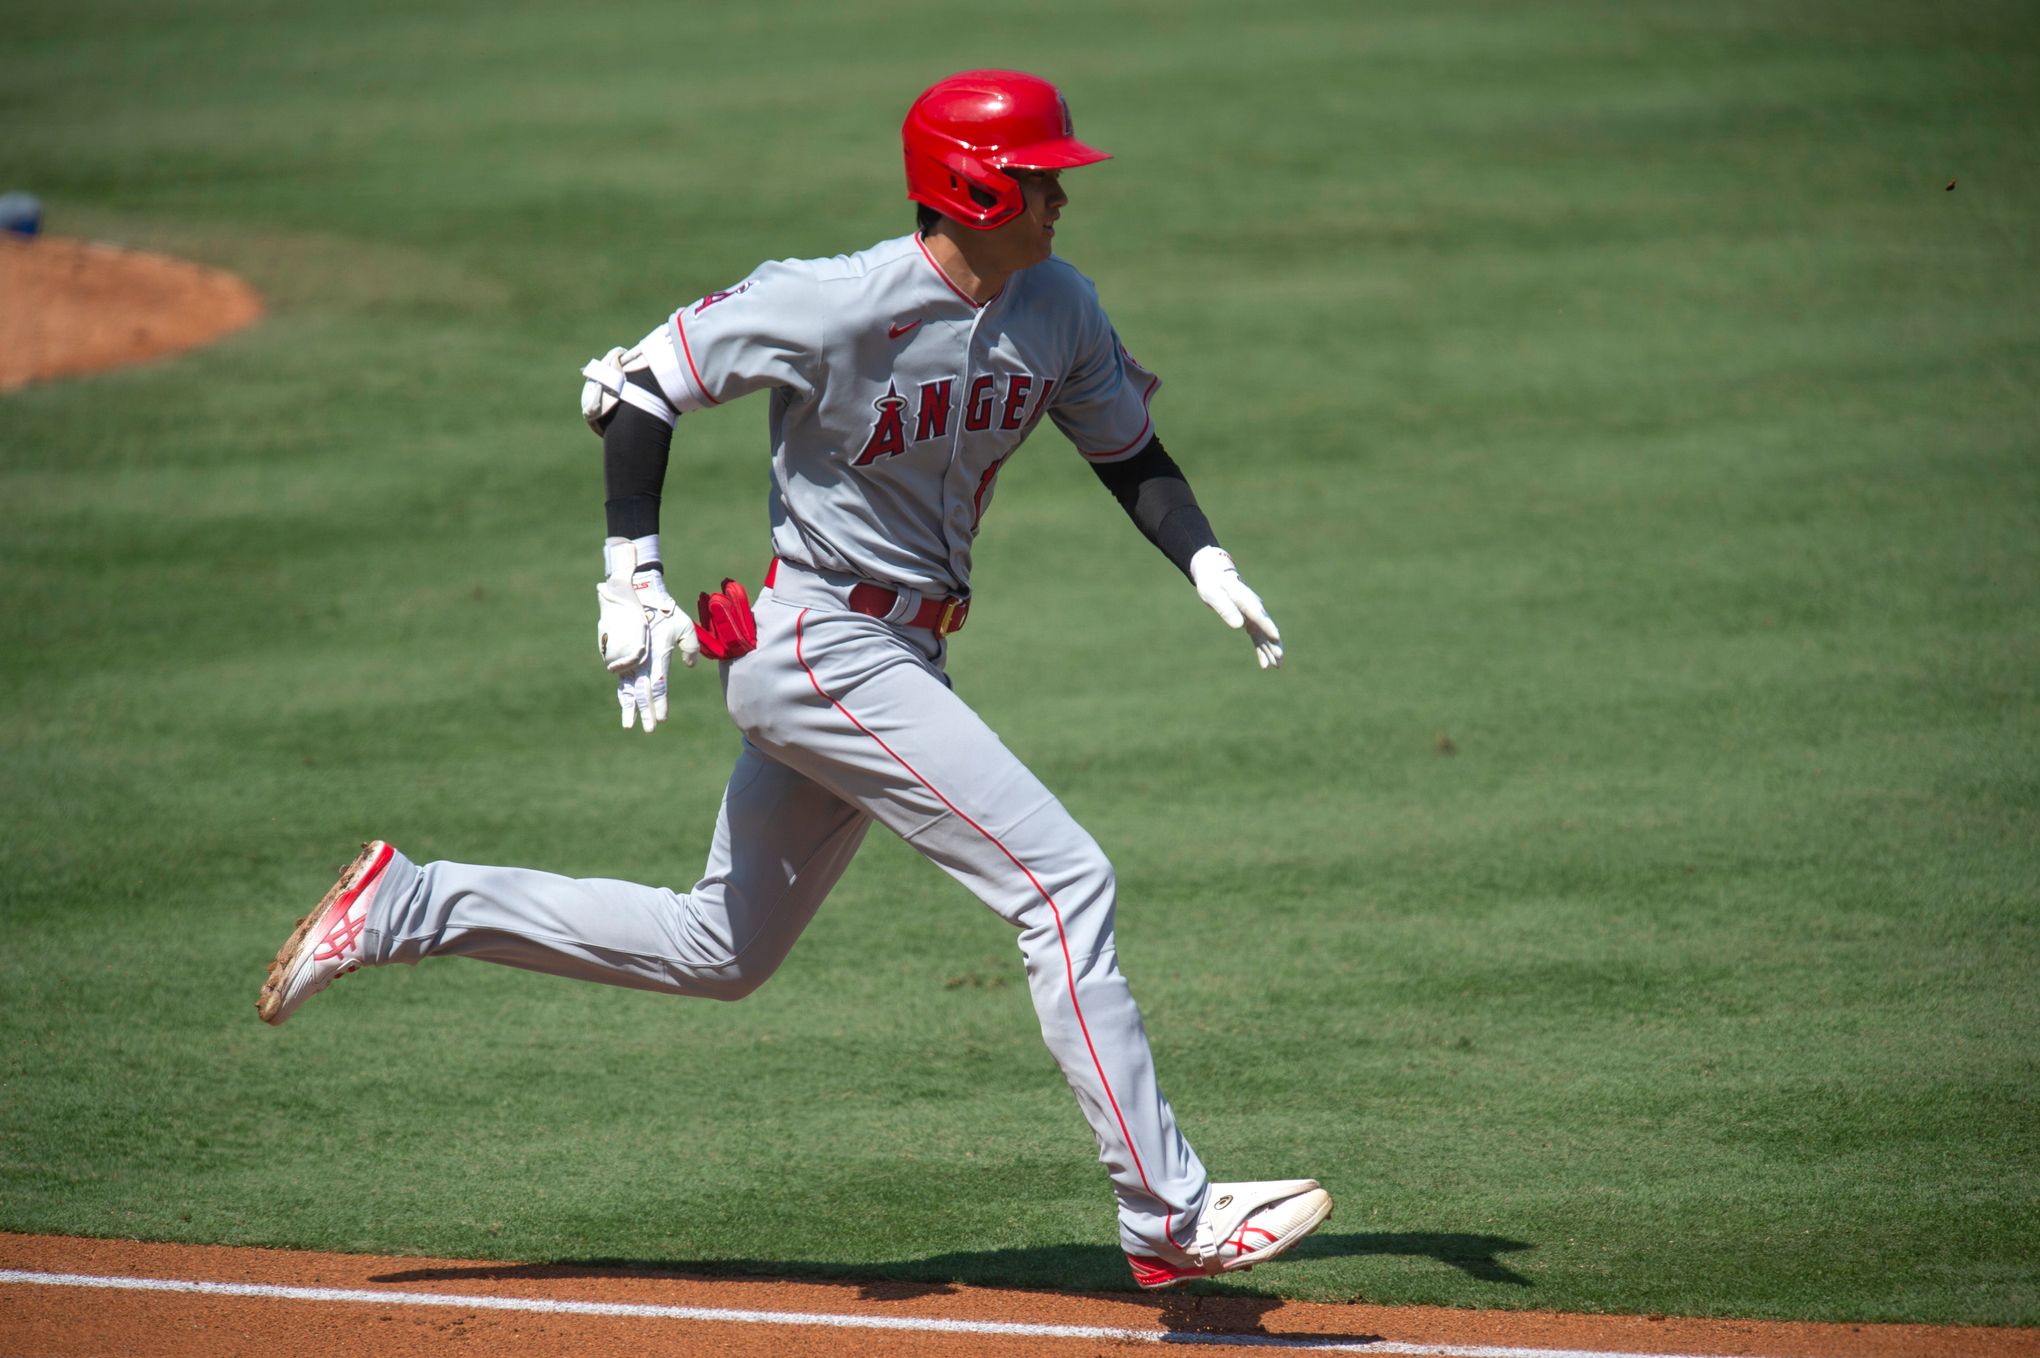 Angels news: Shohei Ohtani still wants to be a 2-way player - Halos Heaven